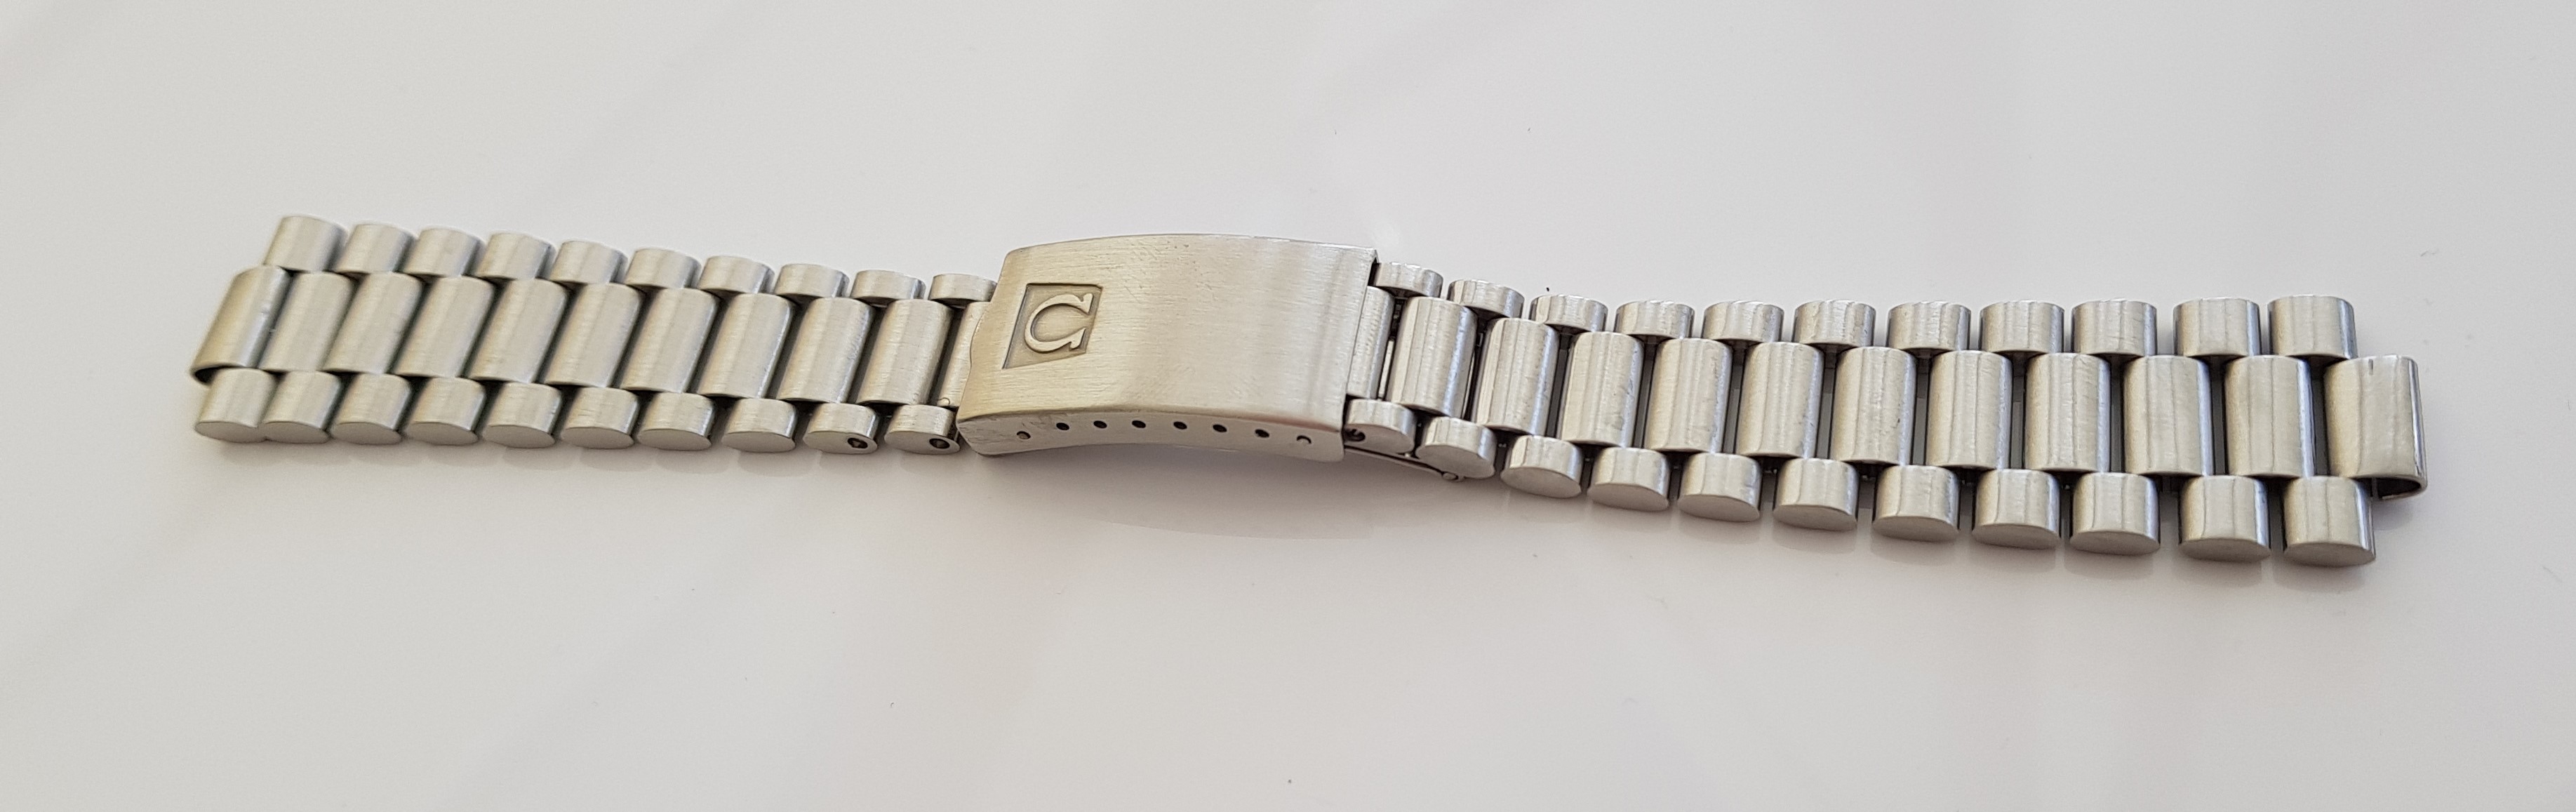 nice to meet you Banquet Partial SOLD - Omega 1171 & 1162/173 bracelets (trapezoid logo) - early 70s vintage  | Omega Forums